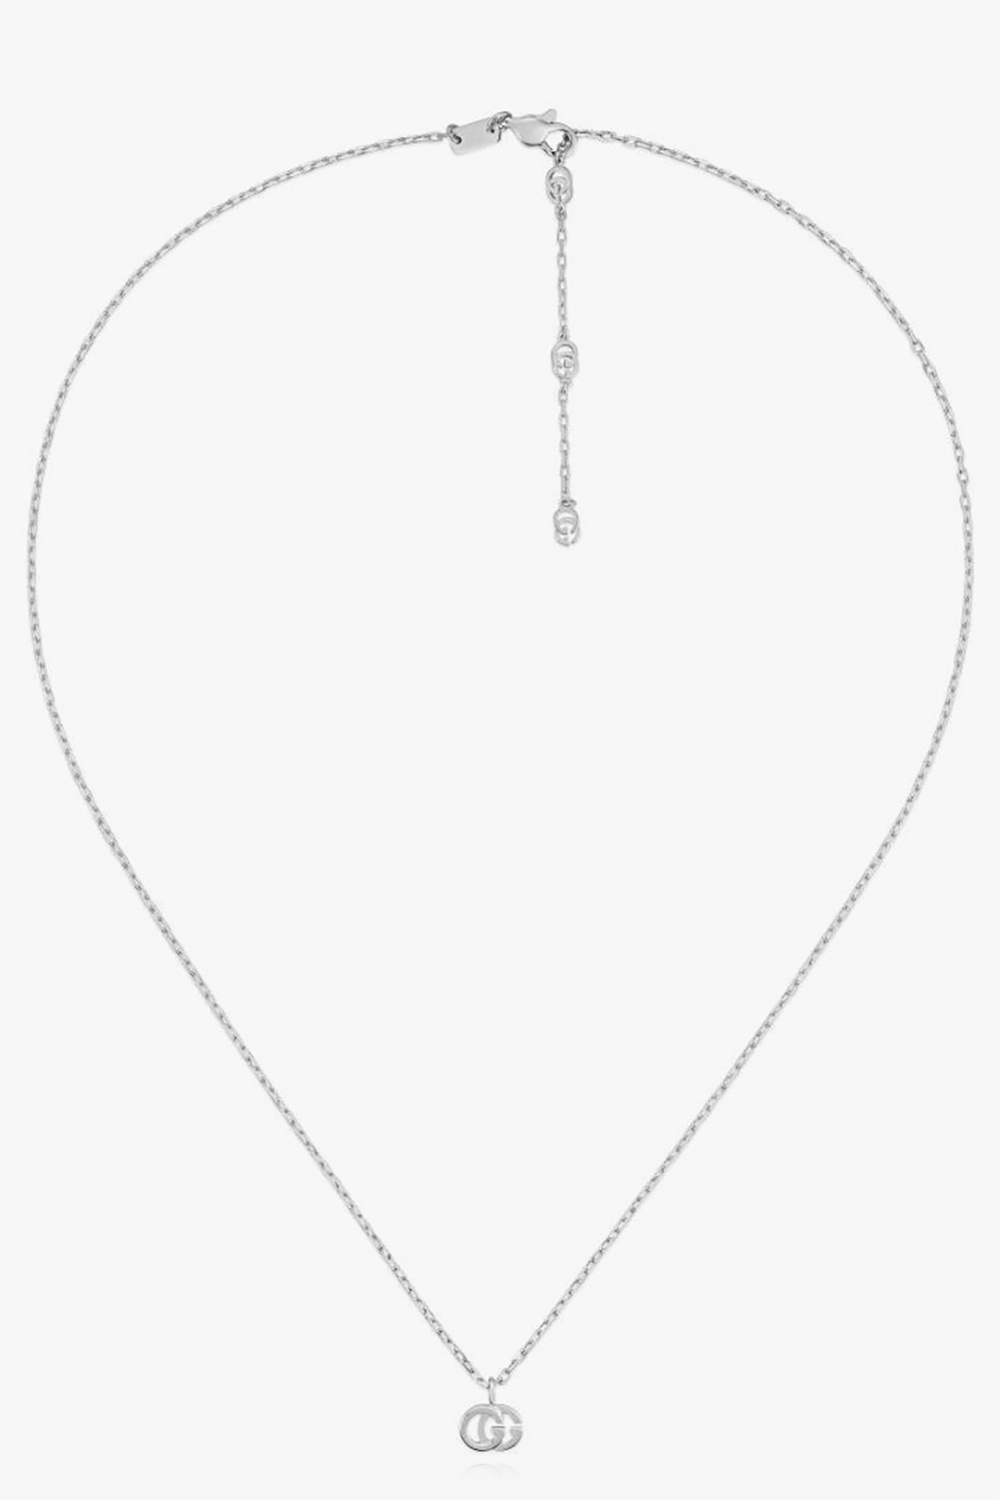 Gucci White gold necklace with diamonds